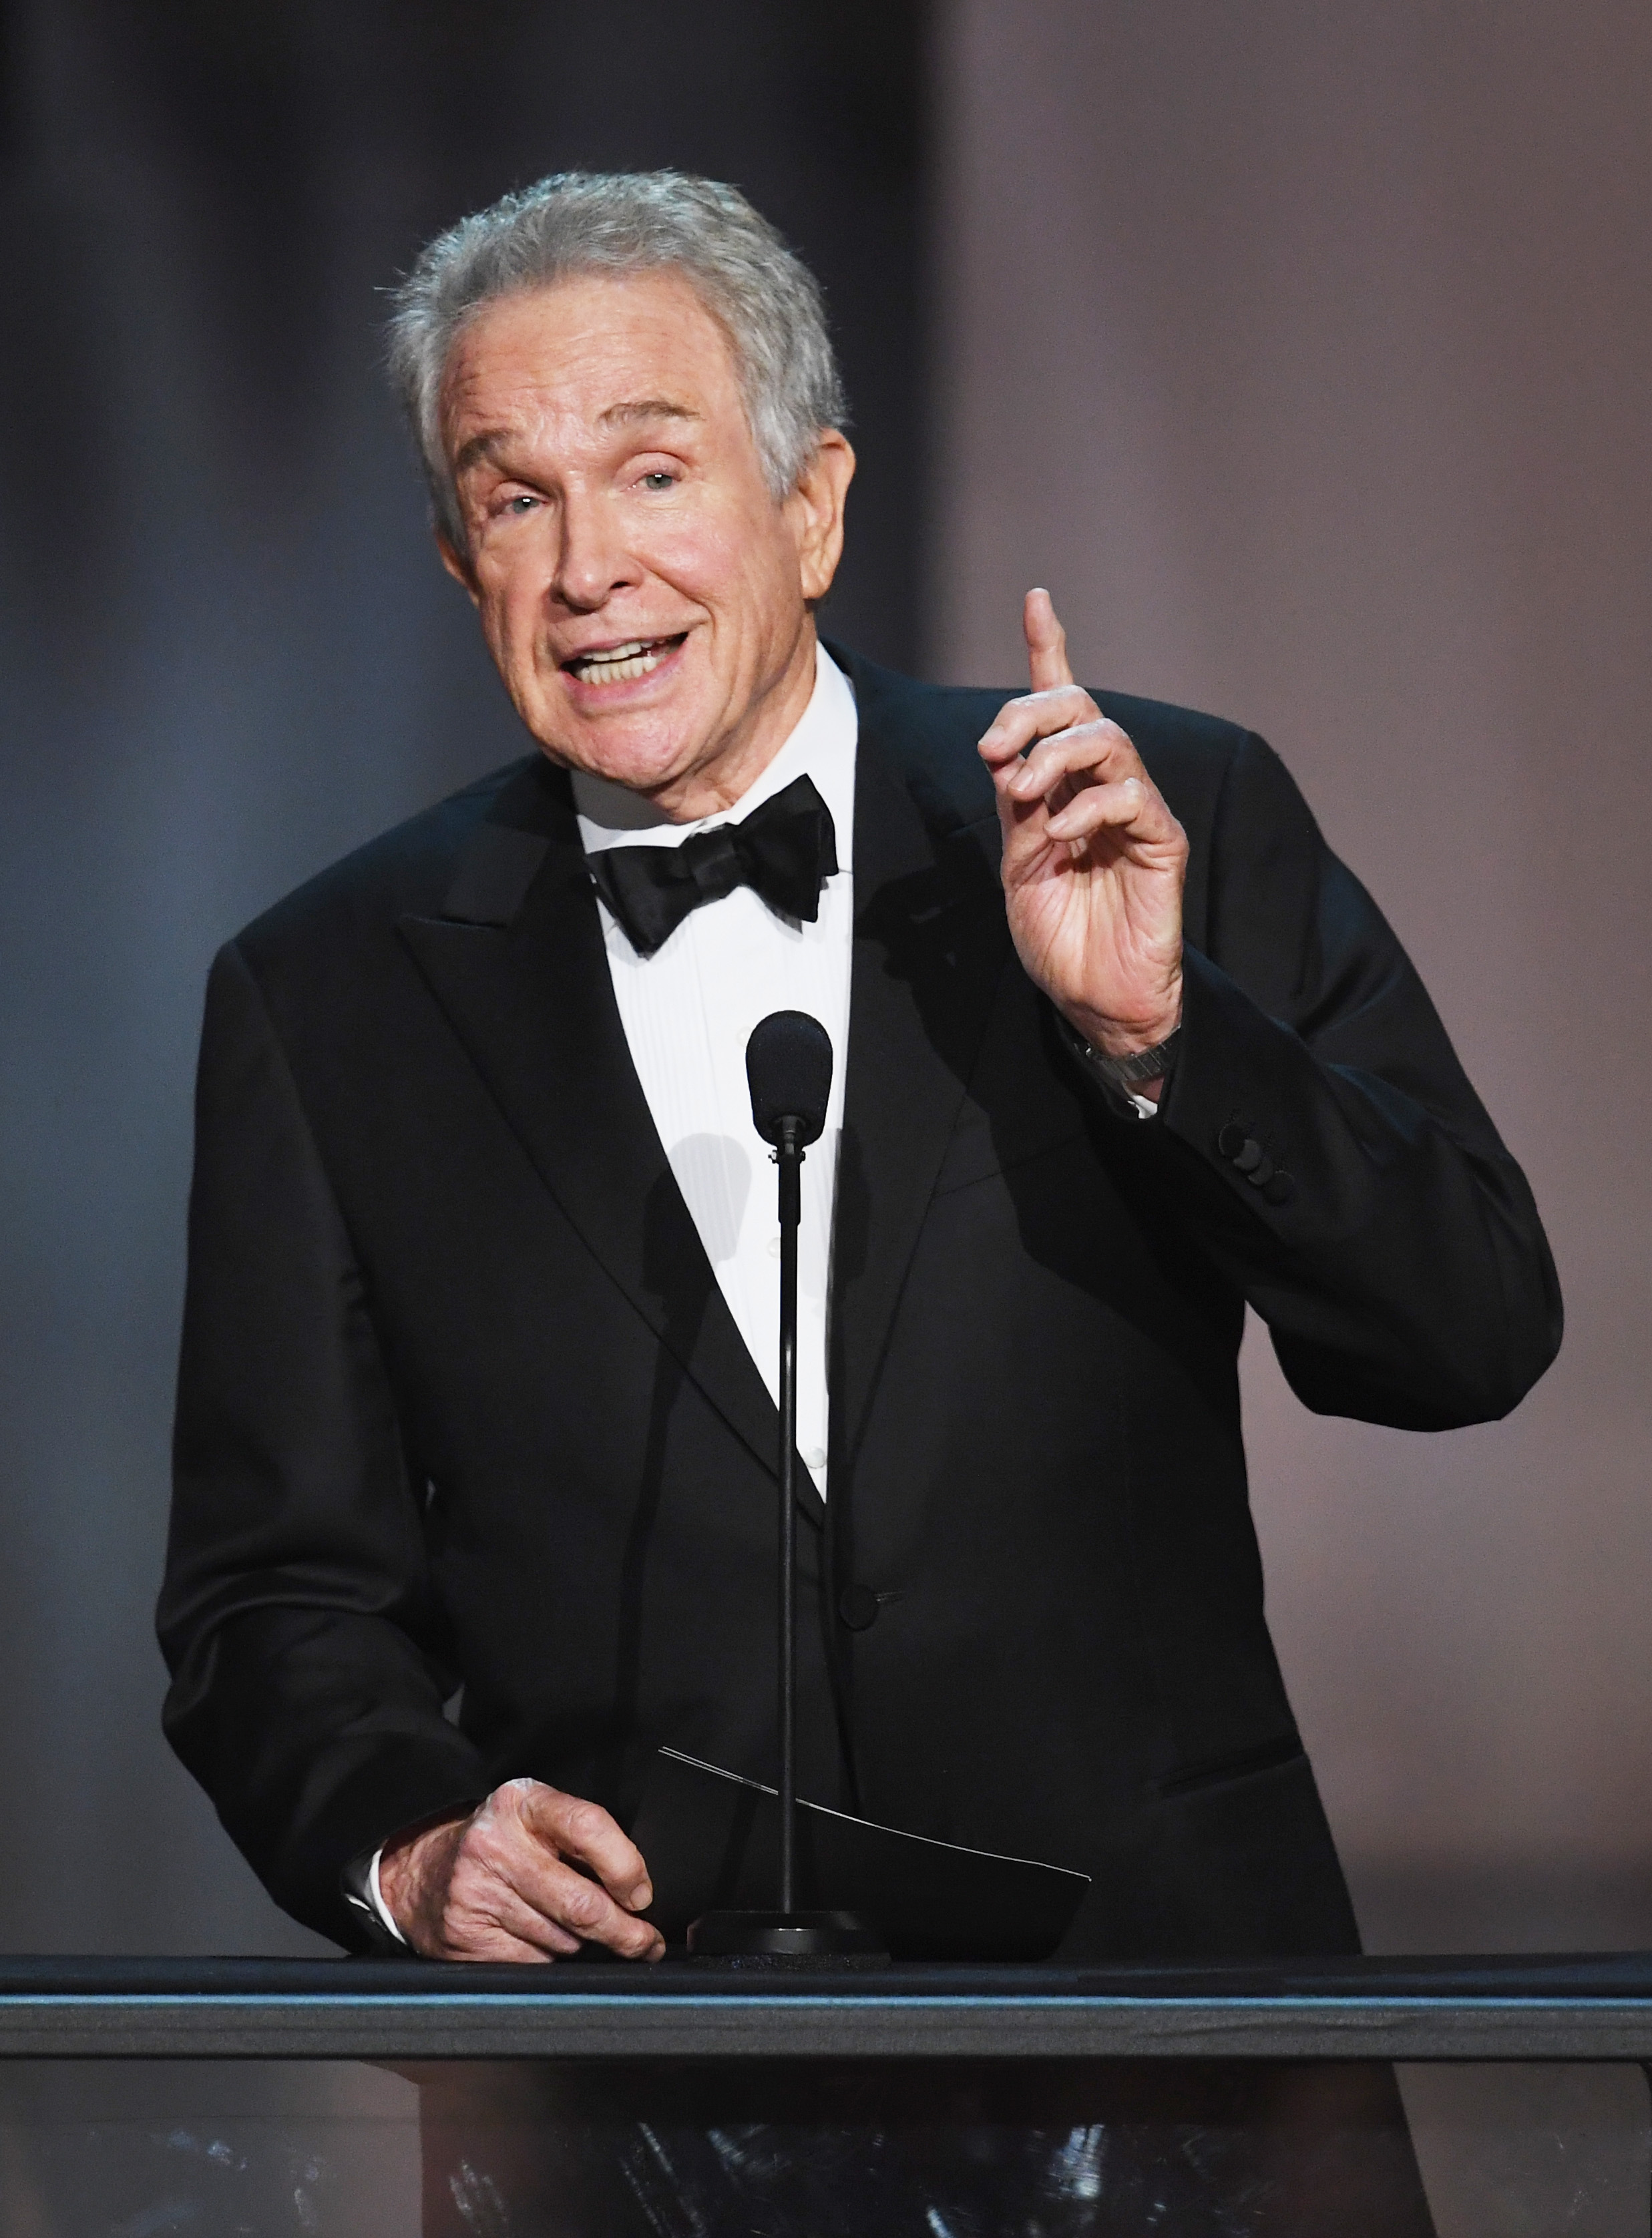 Warren Beatty onstage during the 90th Annual Academy Awards at the Dolby Theatre at Hollywood & Highland Center on March 4, 2018 in Hollywood, California | Photo: Getty Images